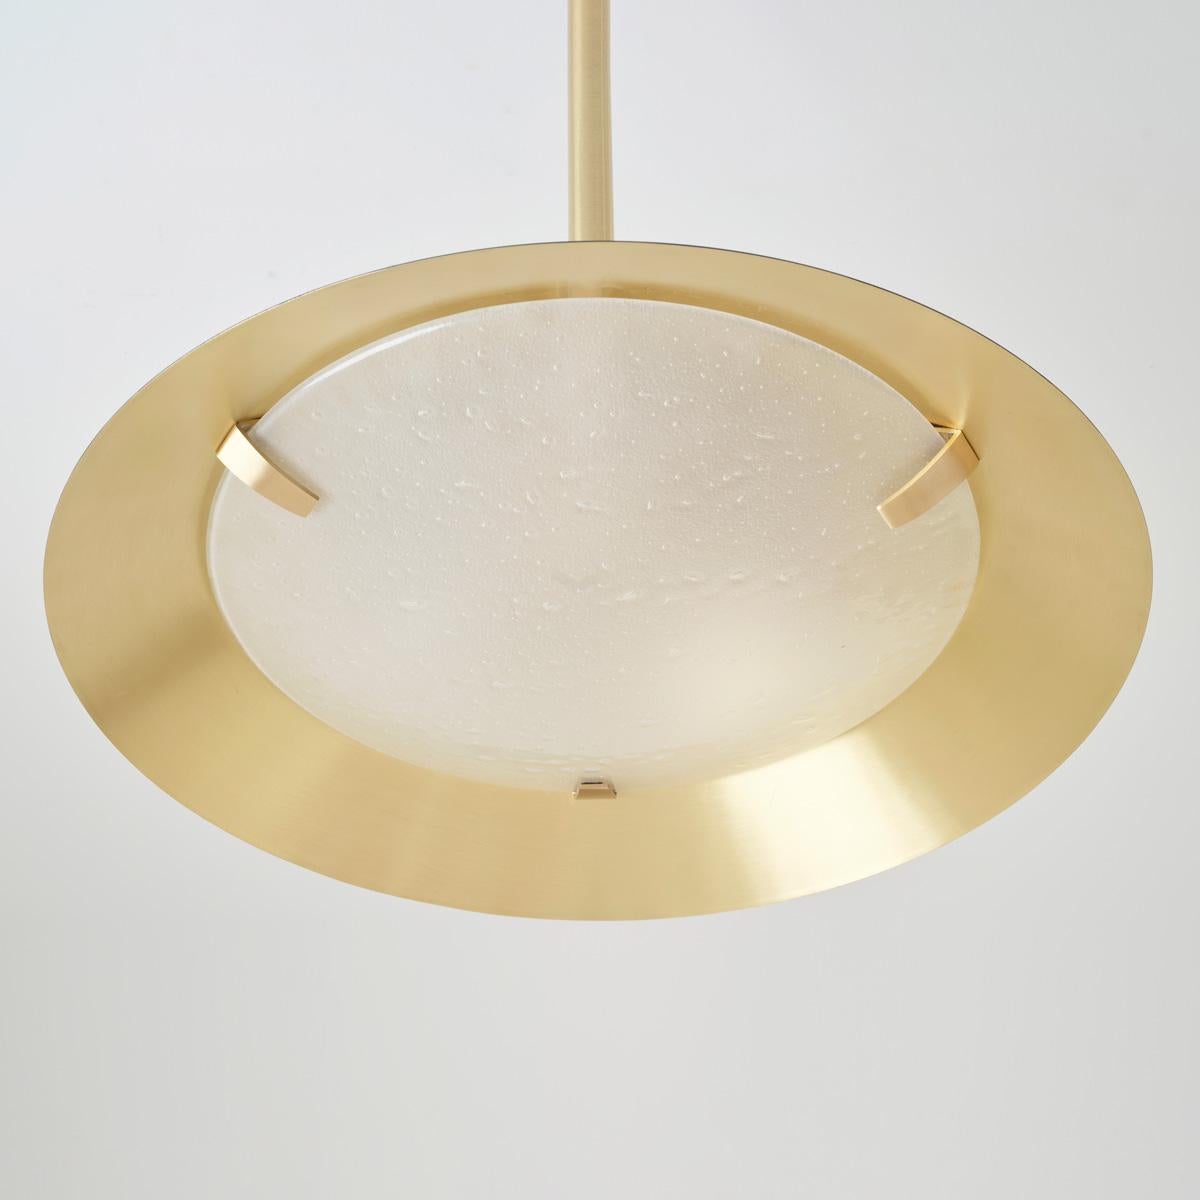 Kono Pendant by Gaspare Asaro. Satin Brass and Stone Grey In New Condition For Sale In New York, NY